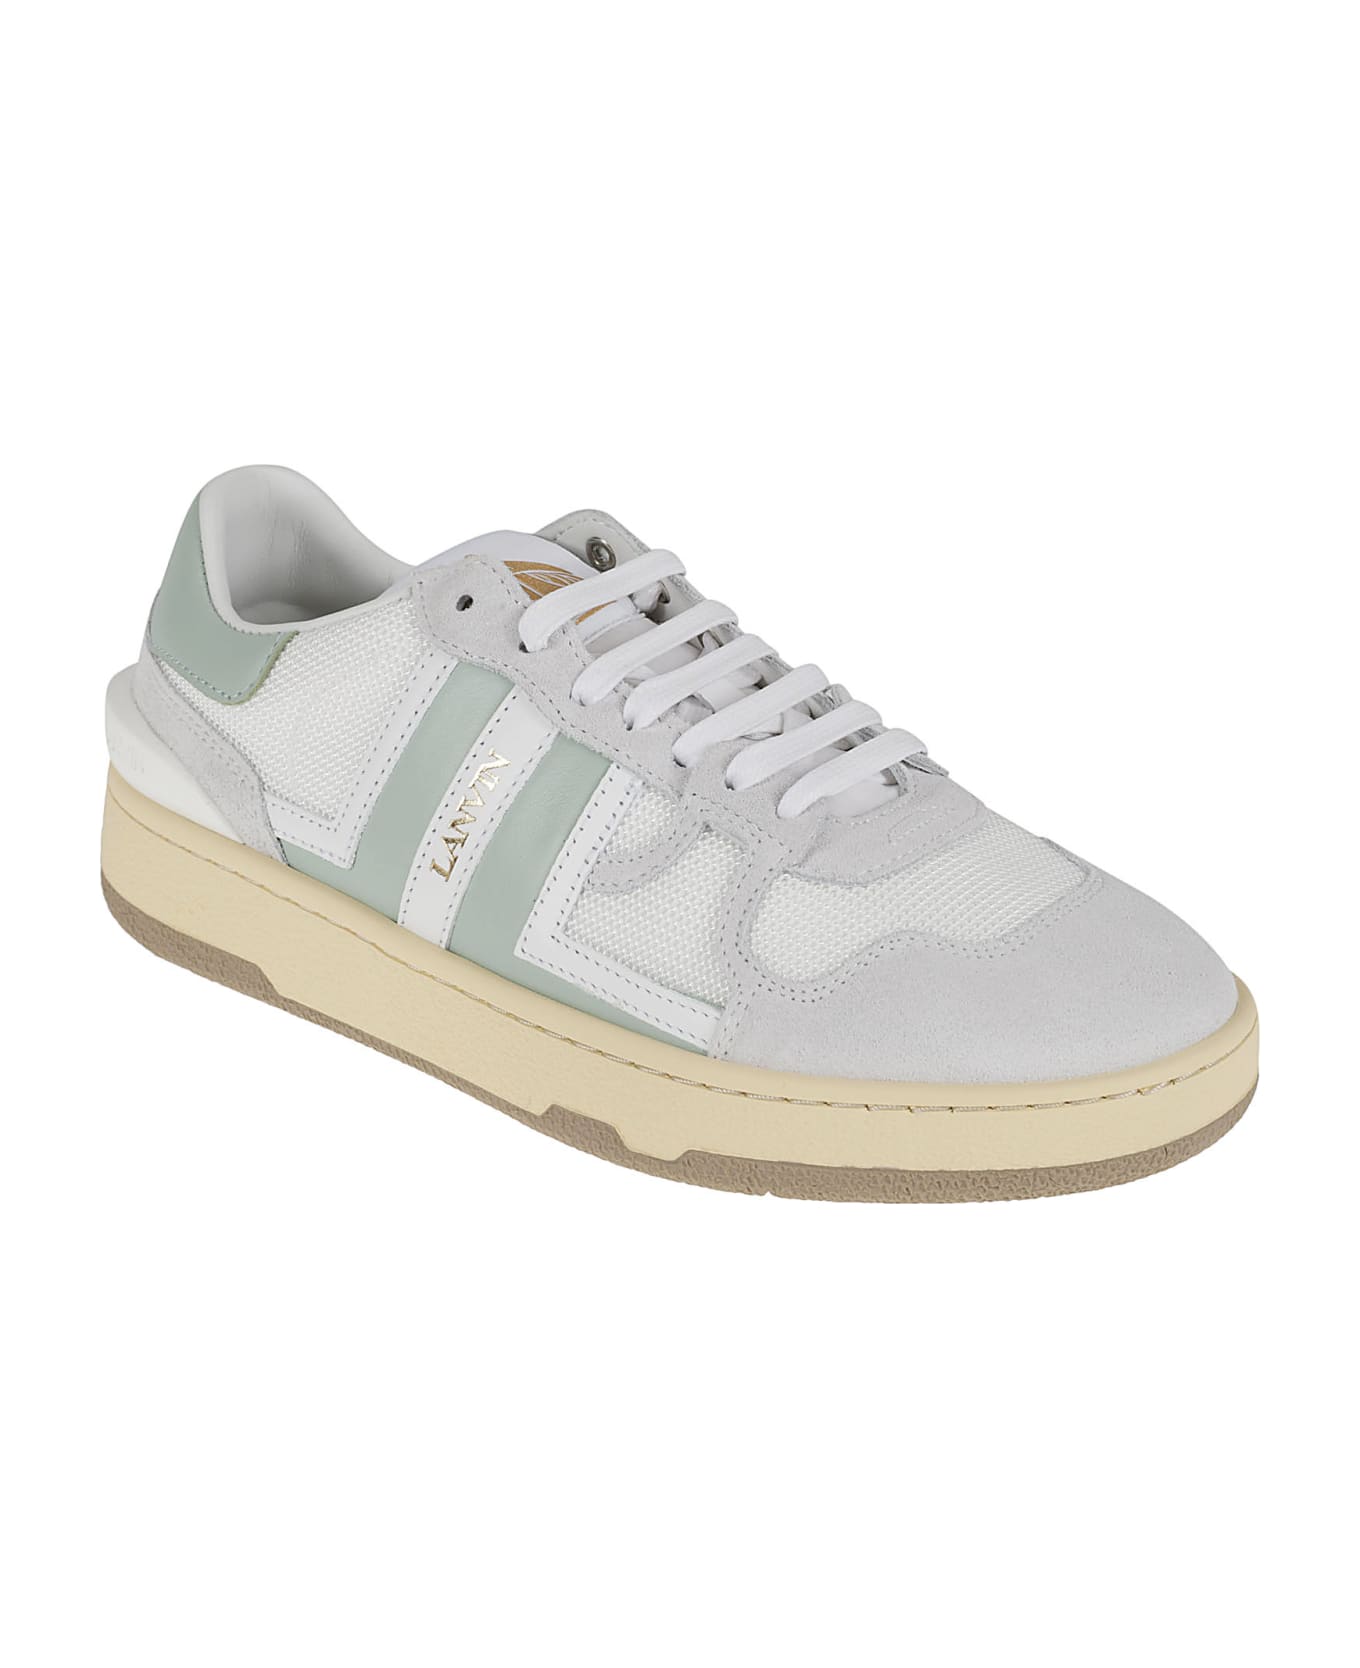 Lanvin Clay Low Top Sneakers - White/Sauge スニーカー